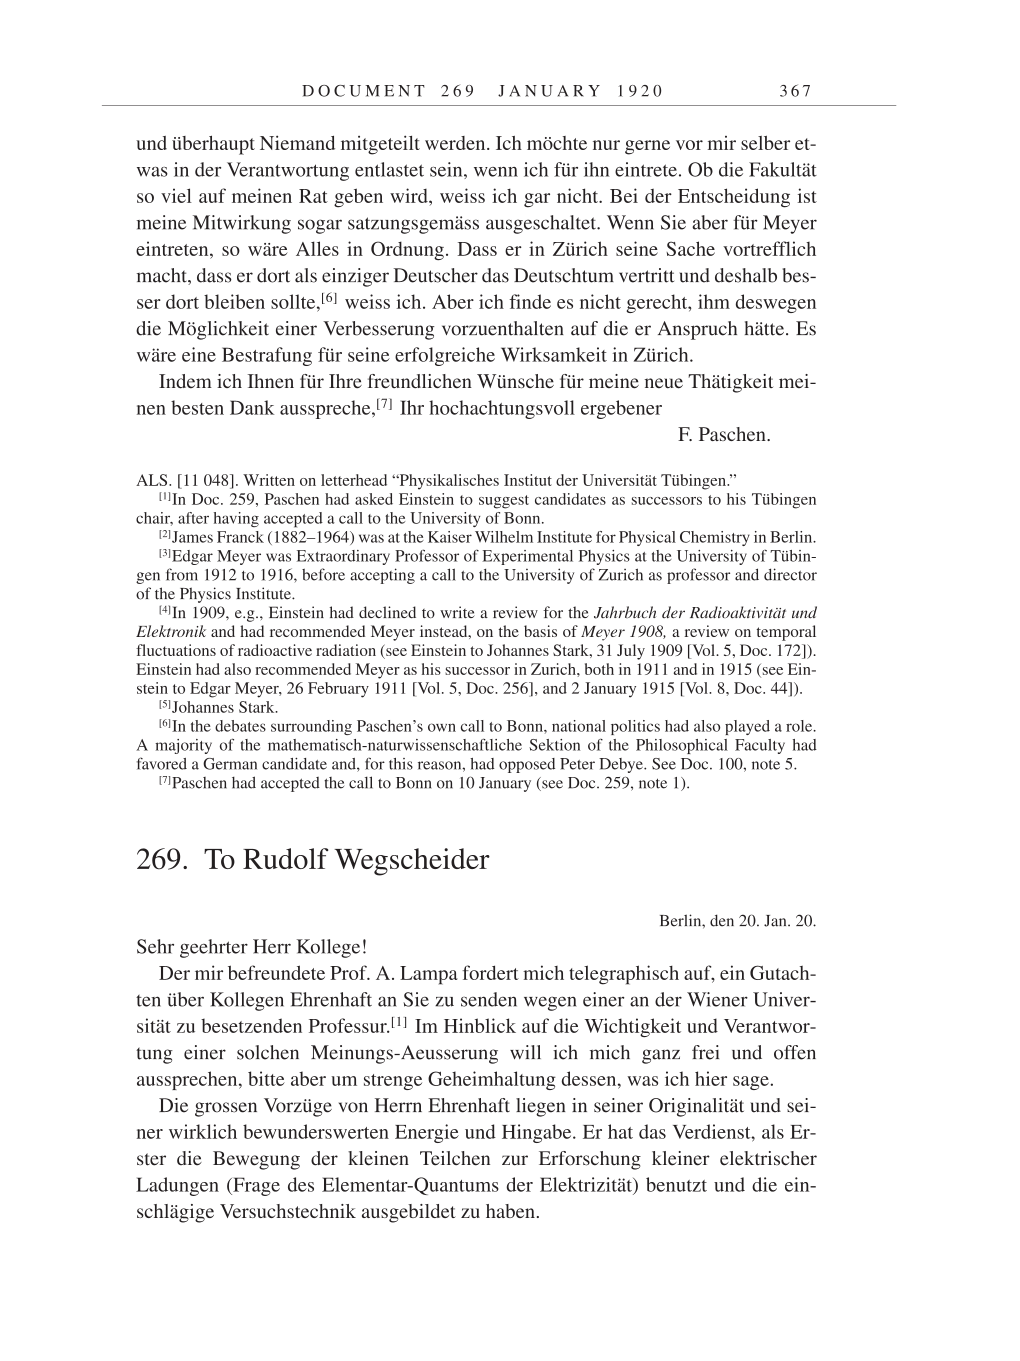 Volume 9: The Berlin Years: Correspondence January 1919-April 1920 page 367